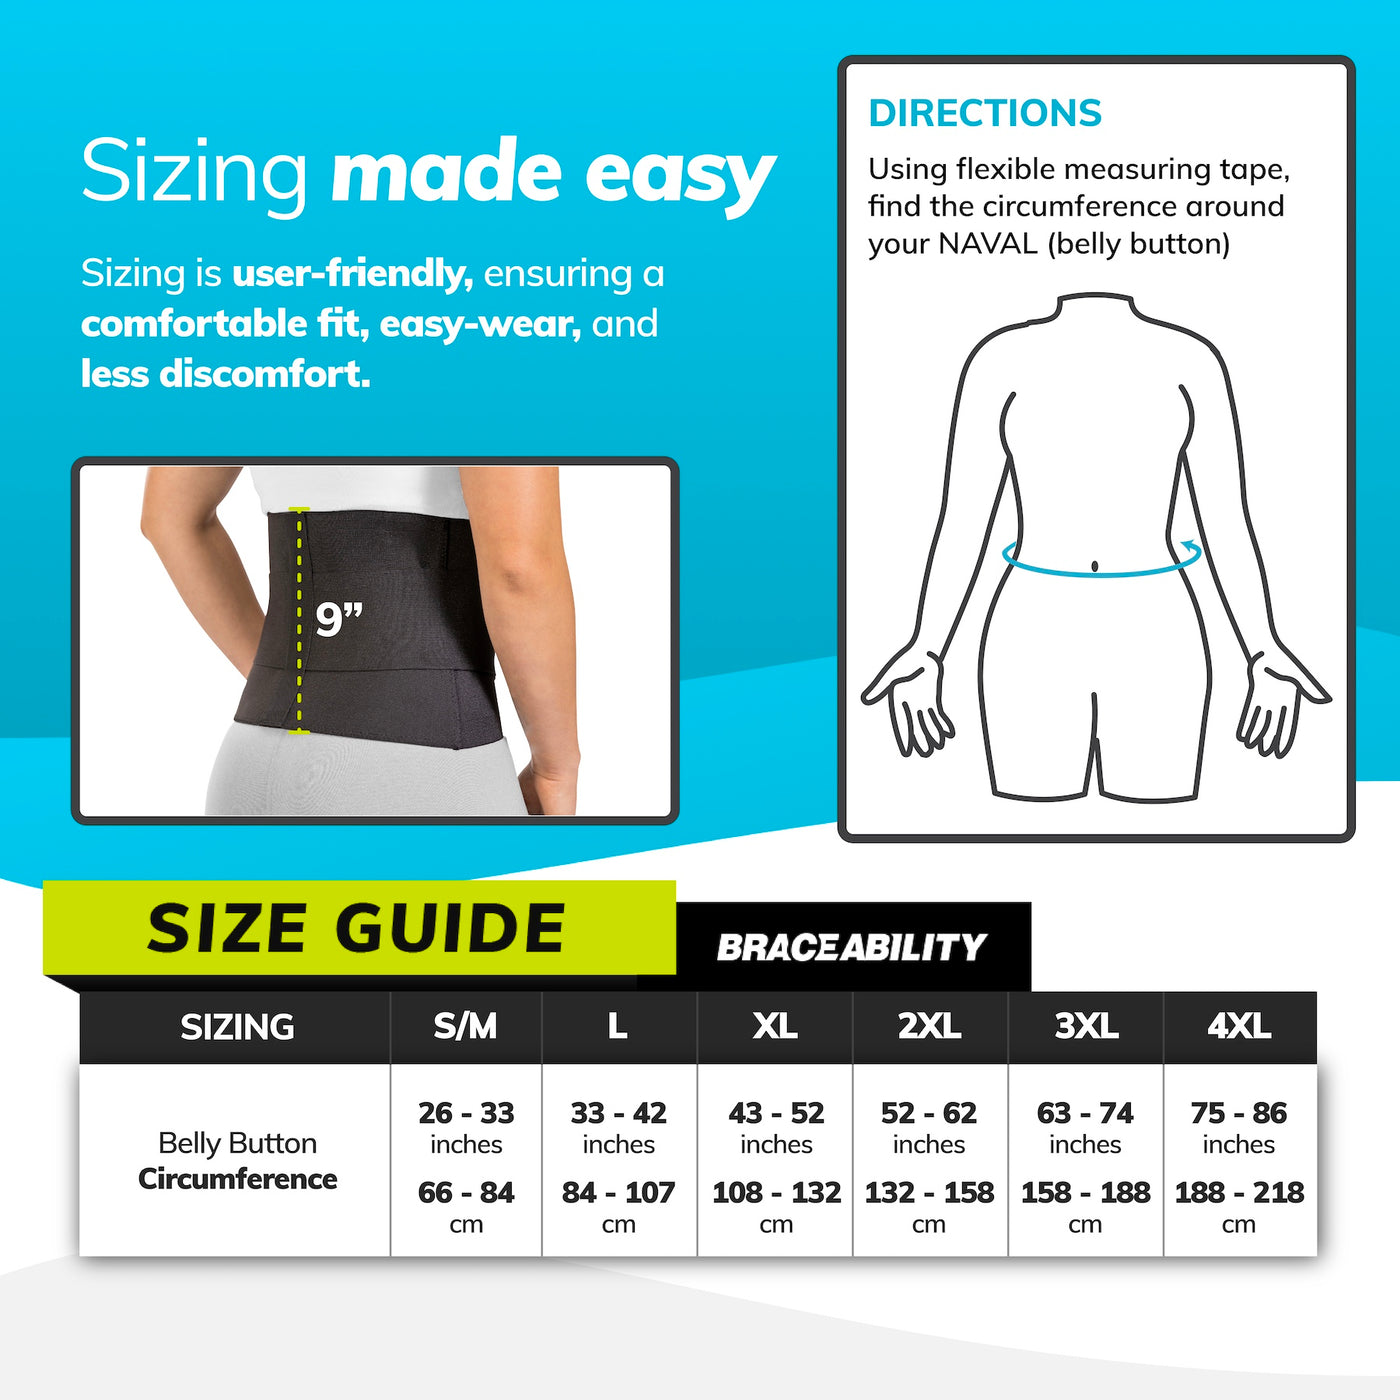 How Can a Back Brace Help You with Sciatica?